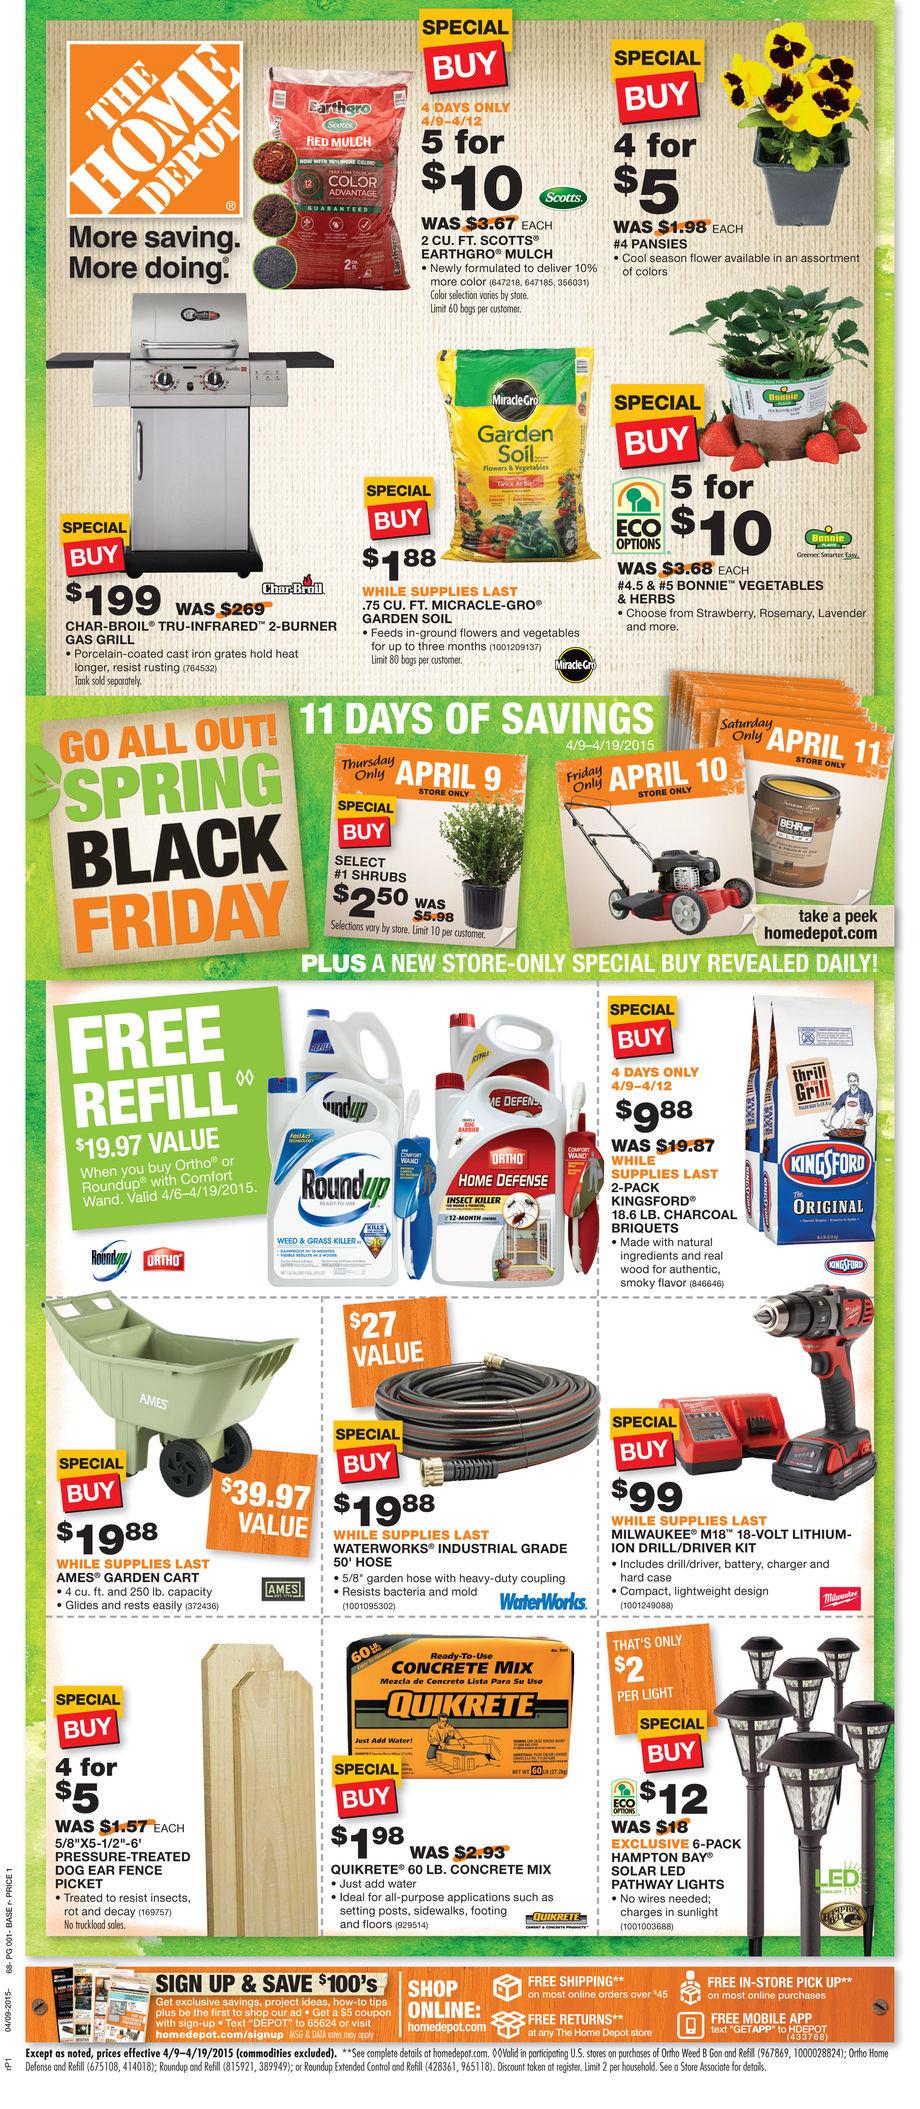 Home Depot Spring Black Friday Sale | Great Deals on Plants, Soil, Mulch and more! | Ship Saves